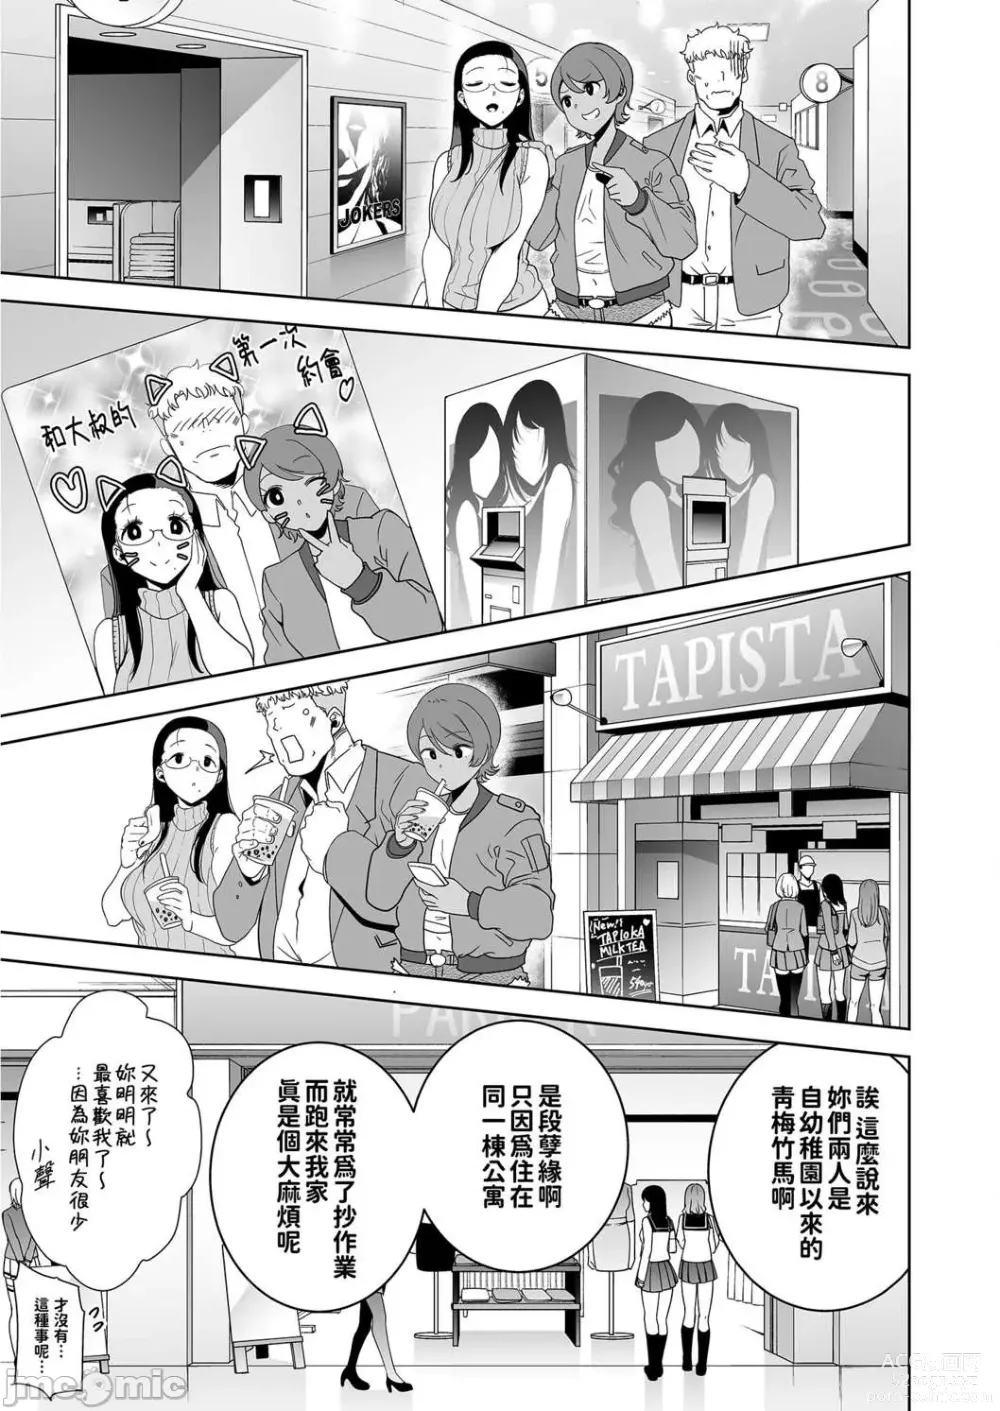 Page 7 of doujinshi 聖華女学院高等部公認竿おじさん 3